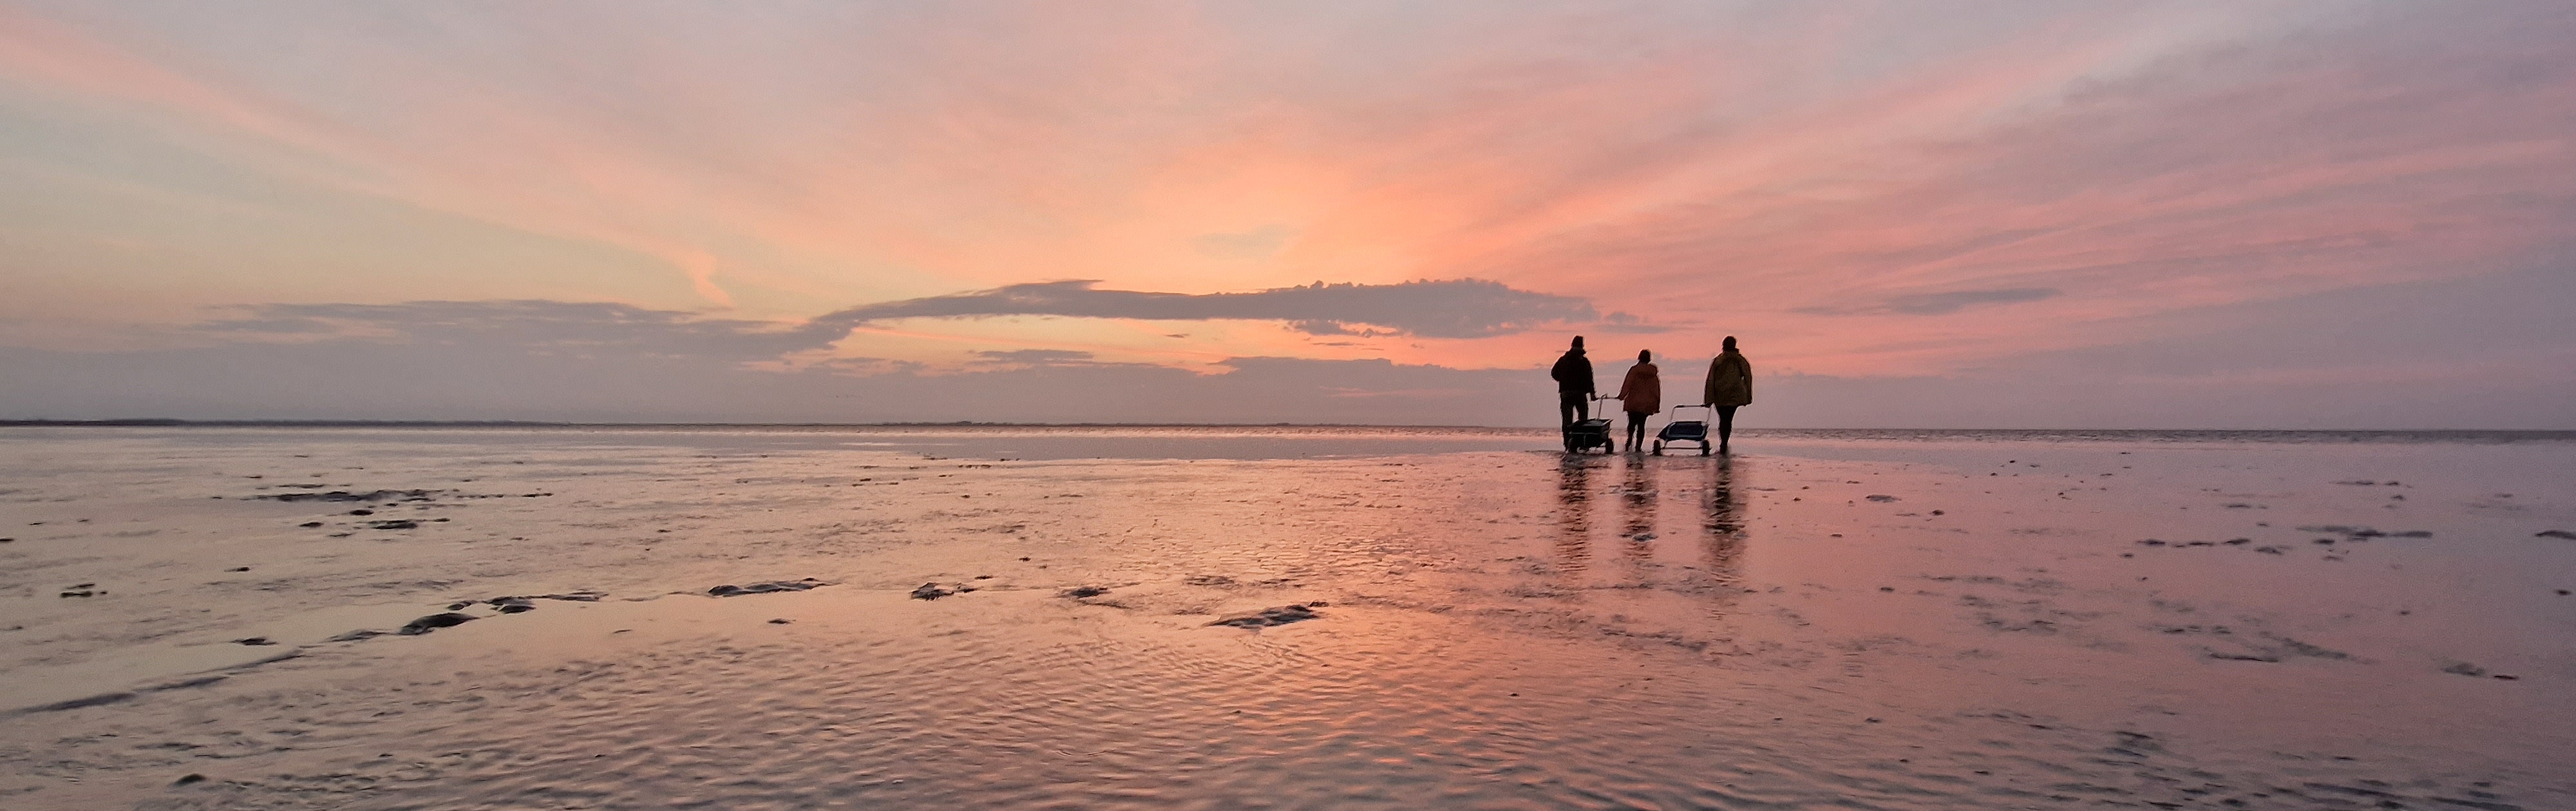 Three people at sunset in the Wadden Sea.